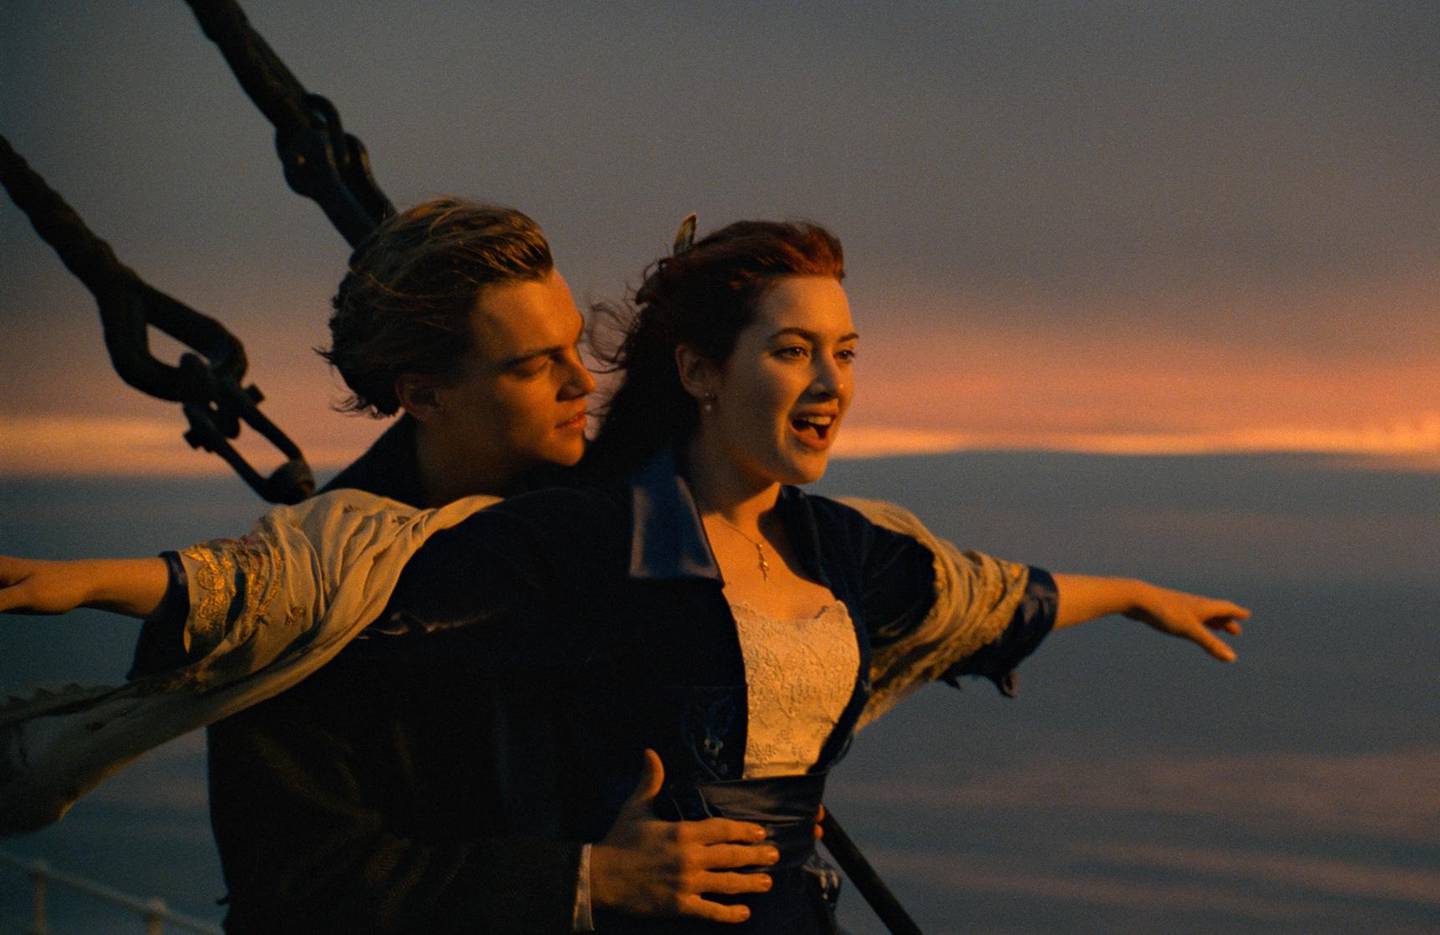 This image released by Paramount Pictures shows Leonardo DiCaprio, left, and Kate Winslet in a scene from "Titanic."  The film will be returning to theaters for one week. Dolby Laboratories, Paramount Pictures and AMC Theaters said Wednesday, Nov. 15, 2017, that a re-mastered version of the James Cameron film will be shown at select AMC locations nationwide starting Dec. 1. Cameron says it is the best-looking version of ?ÄúTitanic?Äù ever released. (Paramount Pictures via AP)